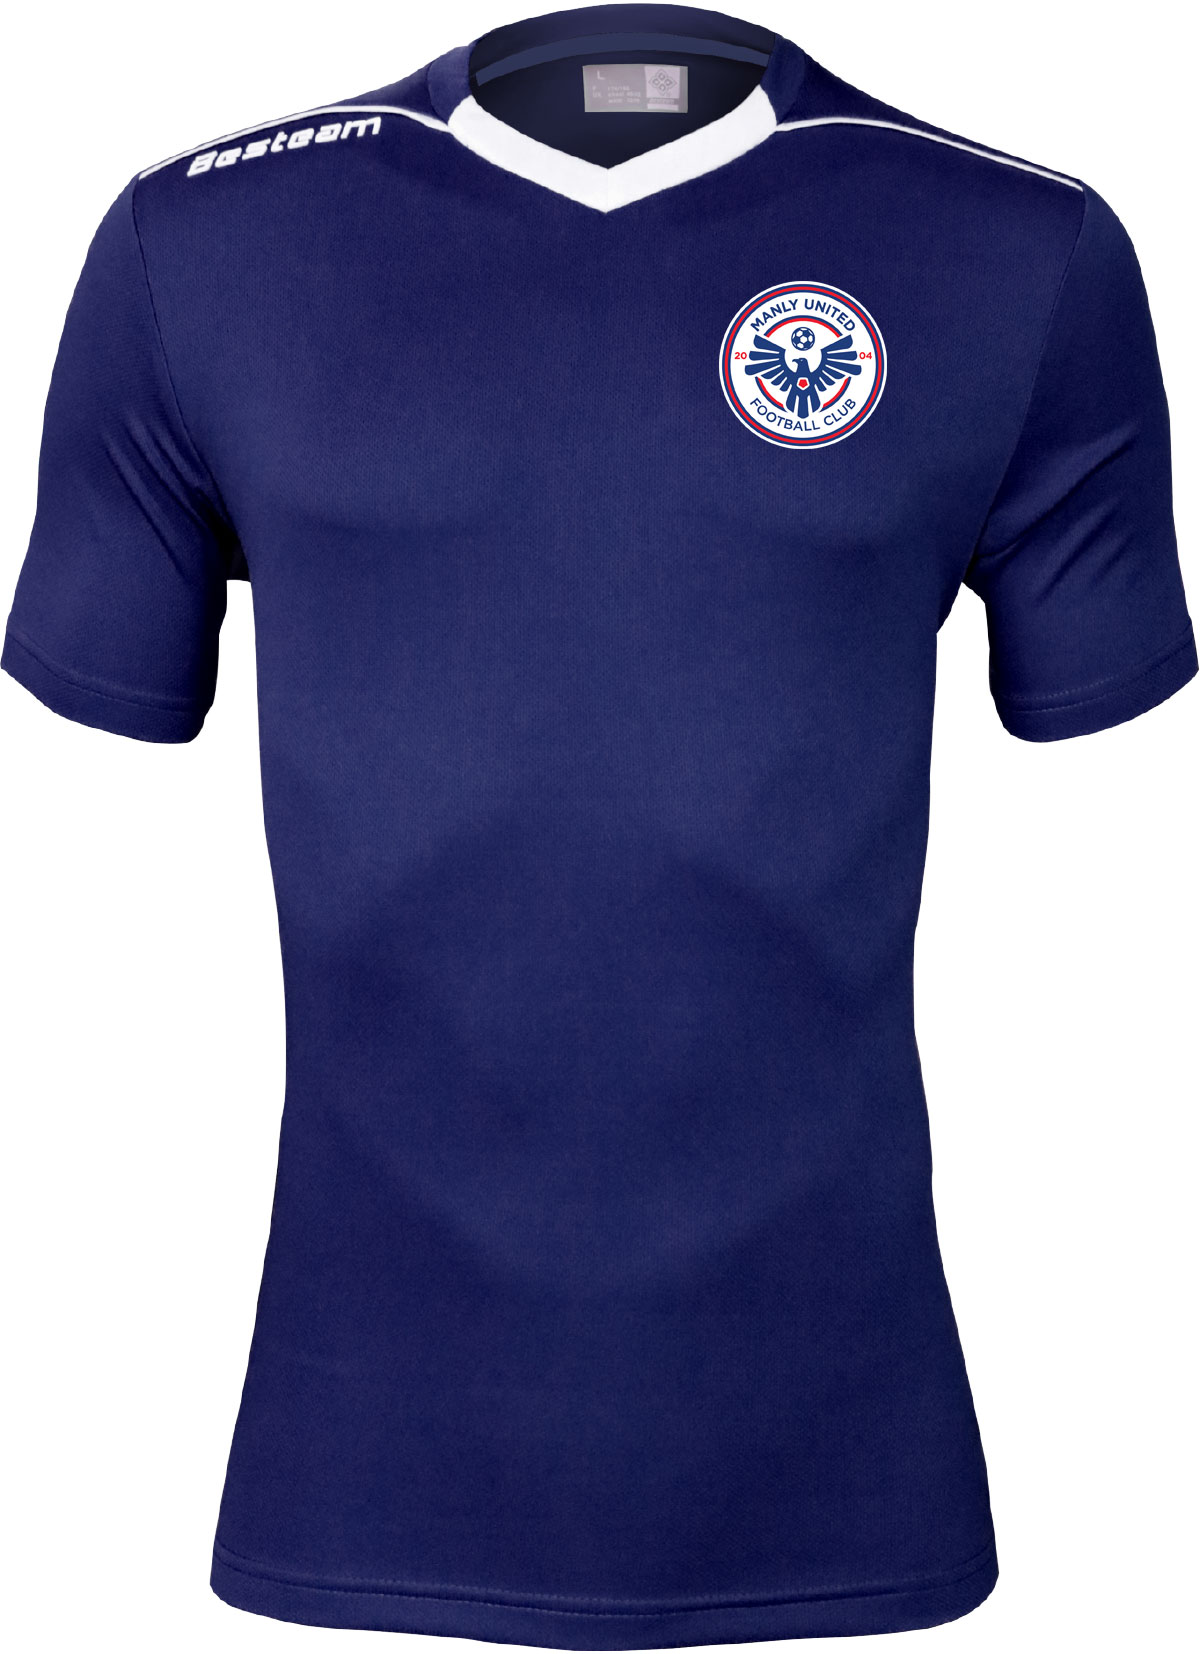 MUFC Training Jersey - Manly United Football Club